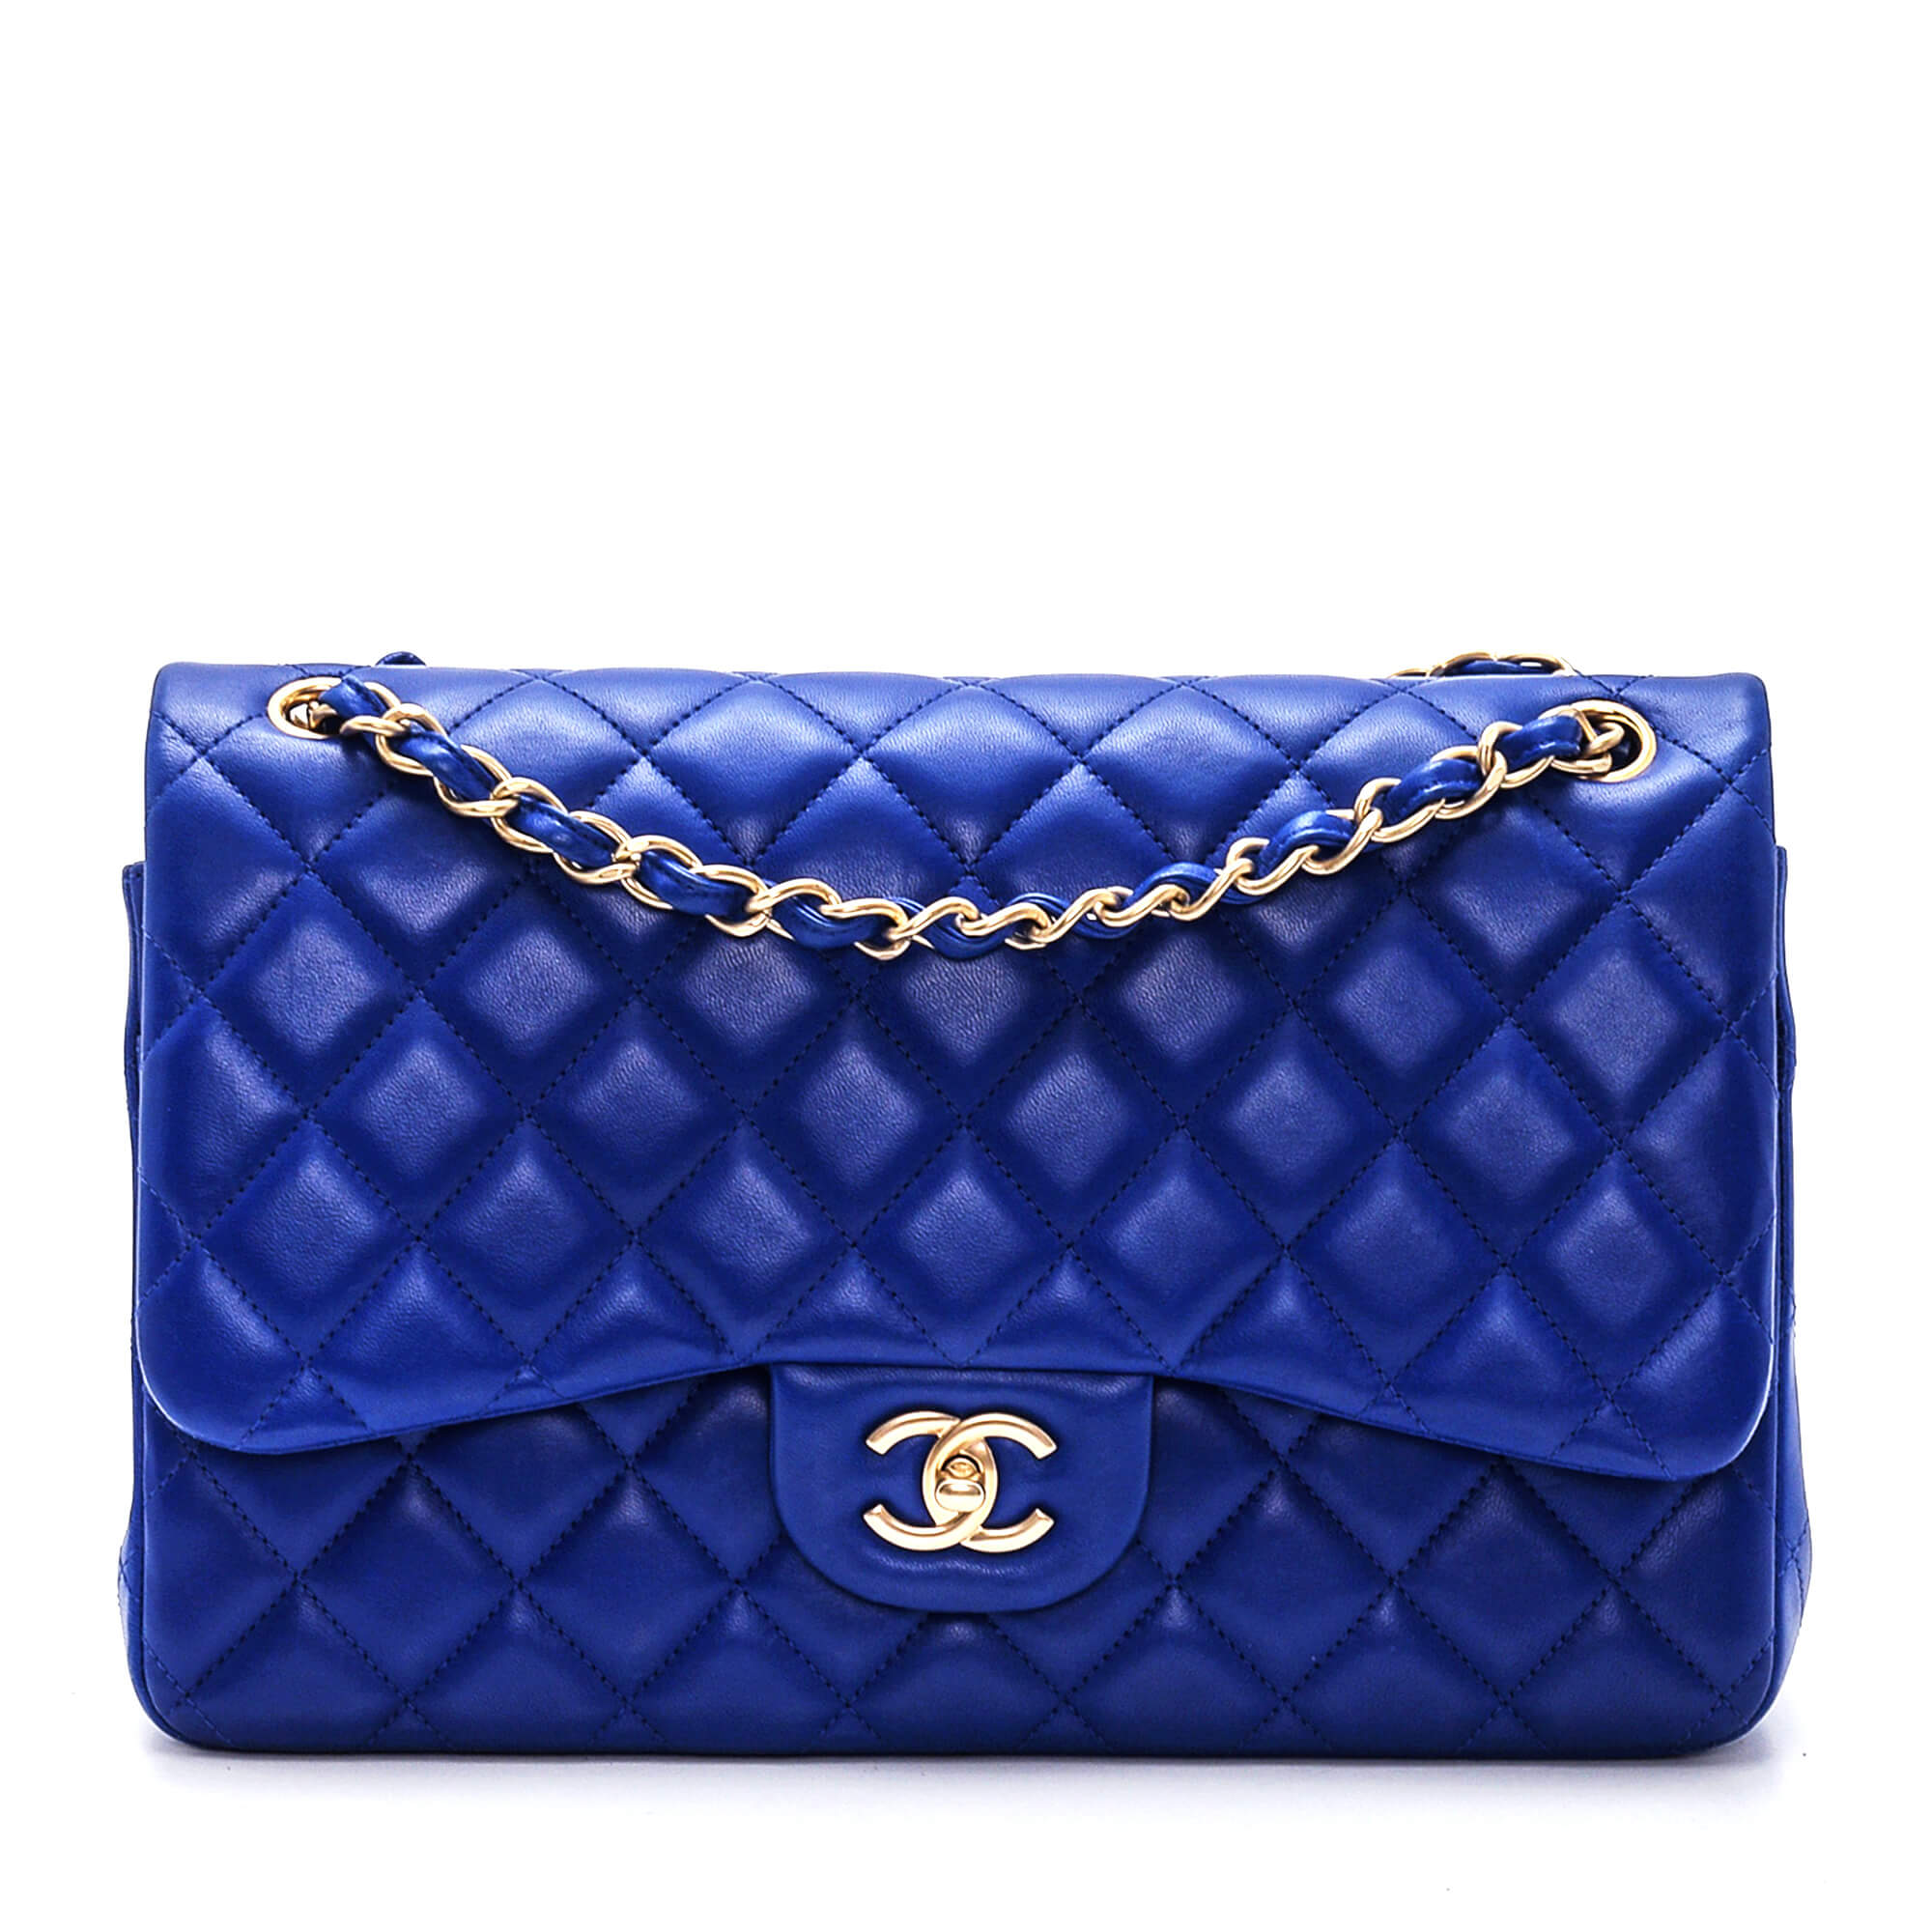 Chanel - Royal Blue Quilted Lambskin Leather Jumbo Double Flap Bag